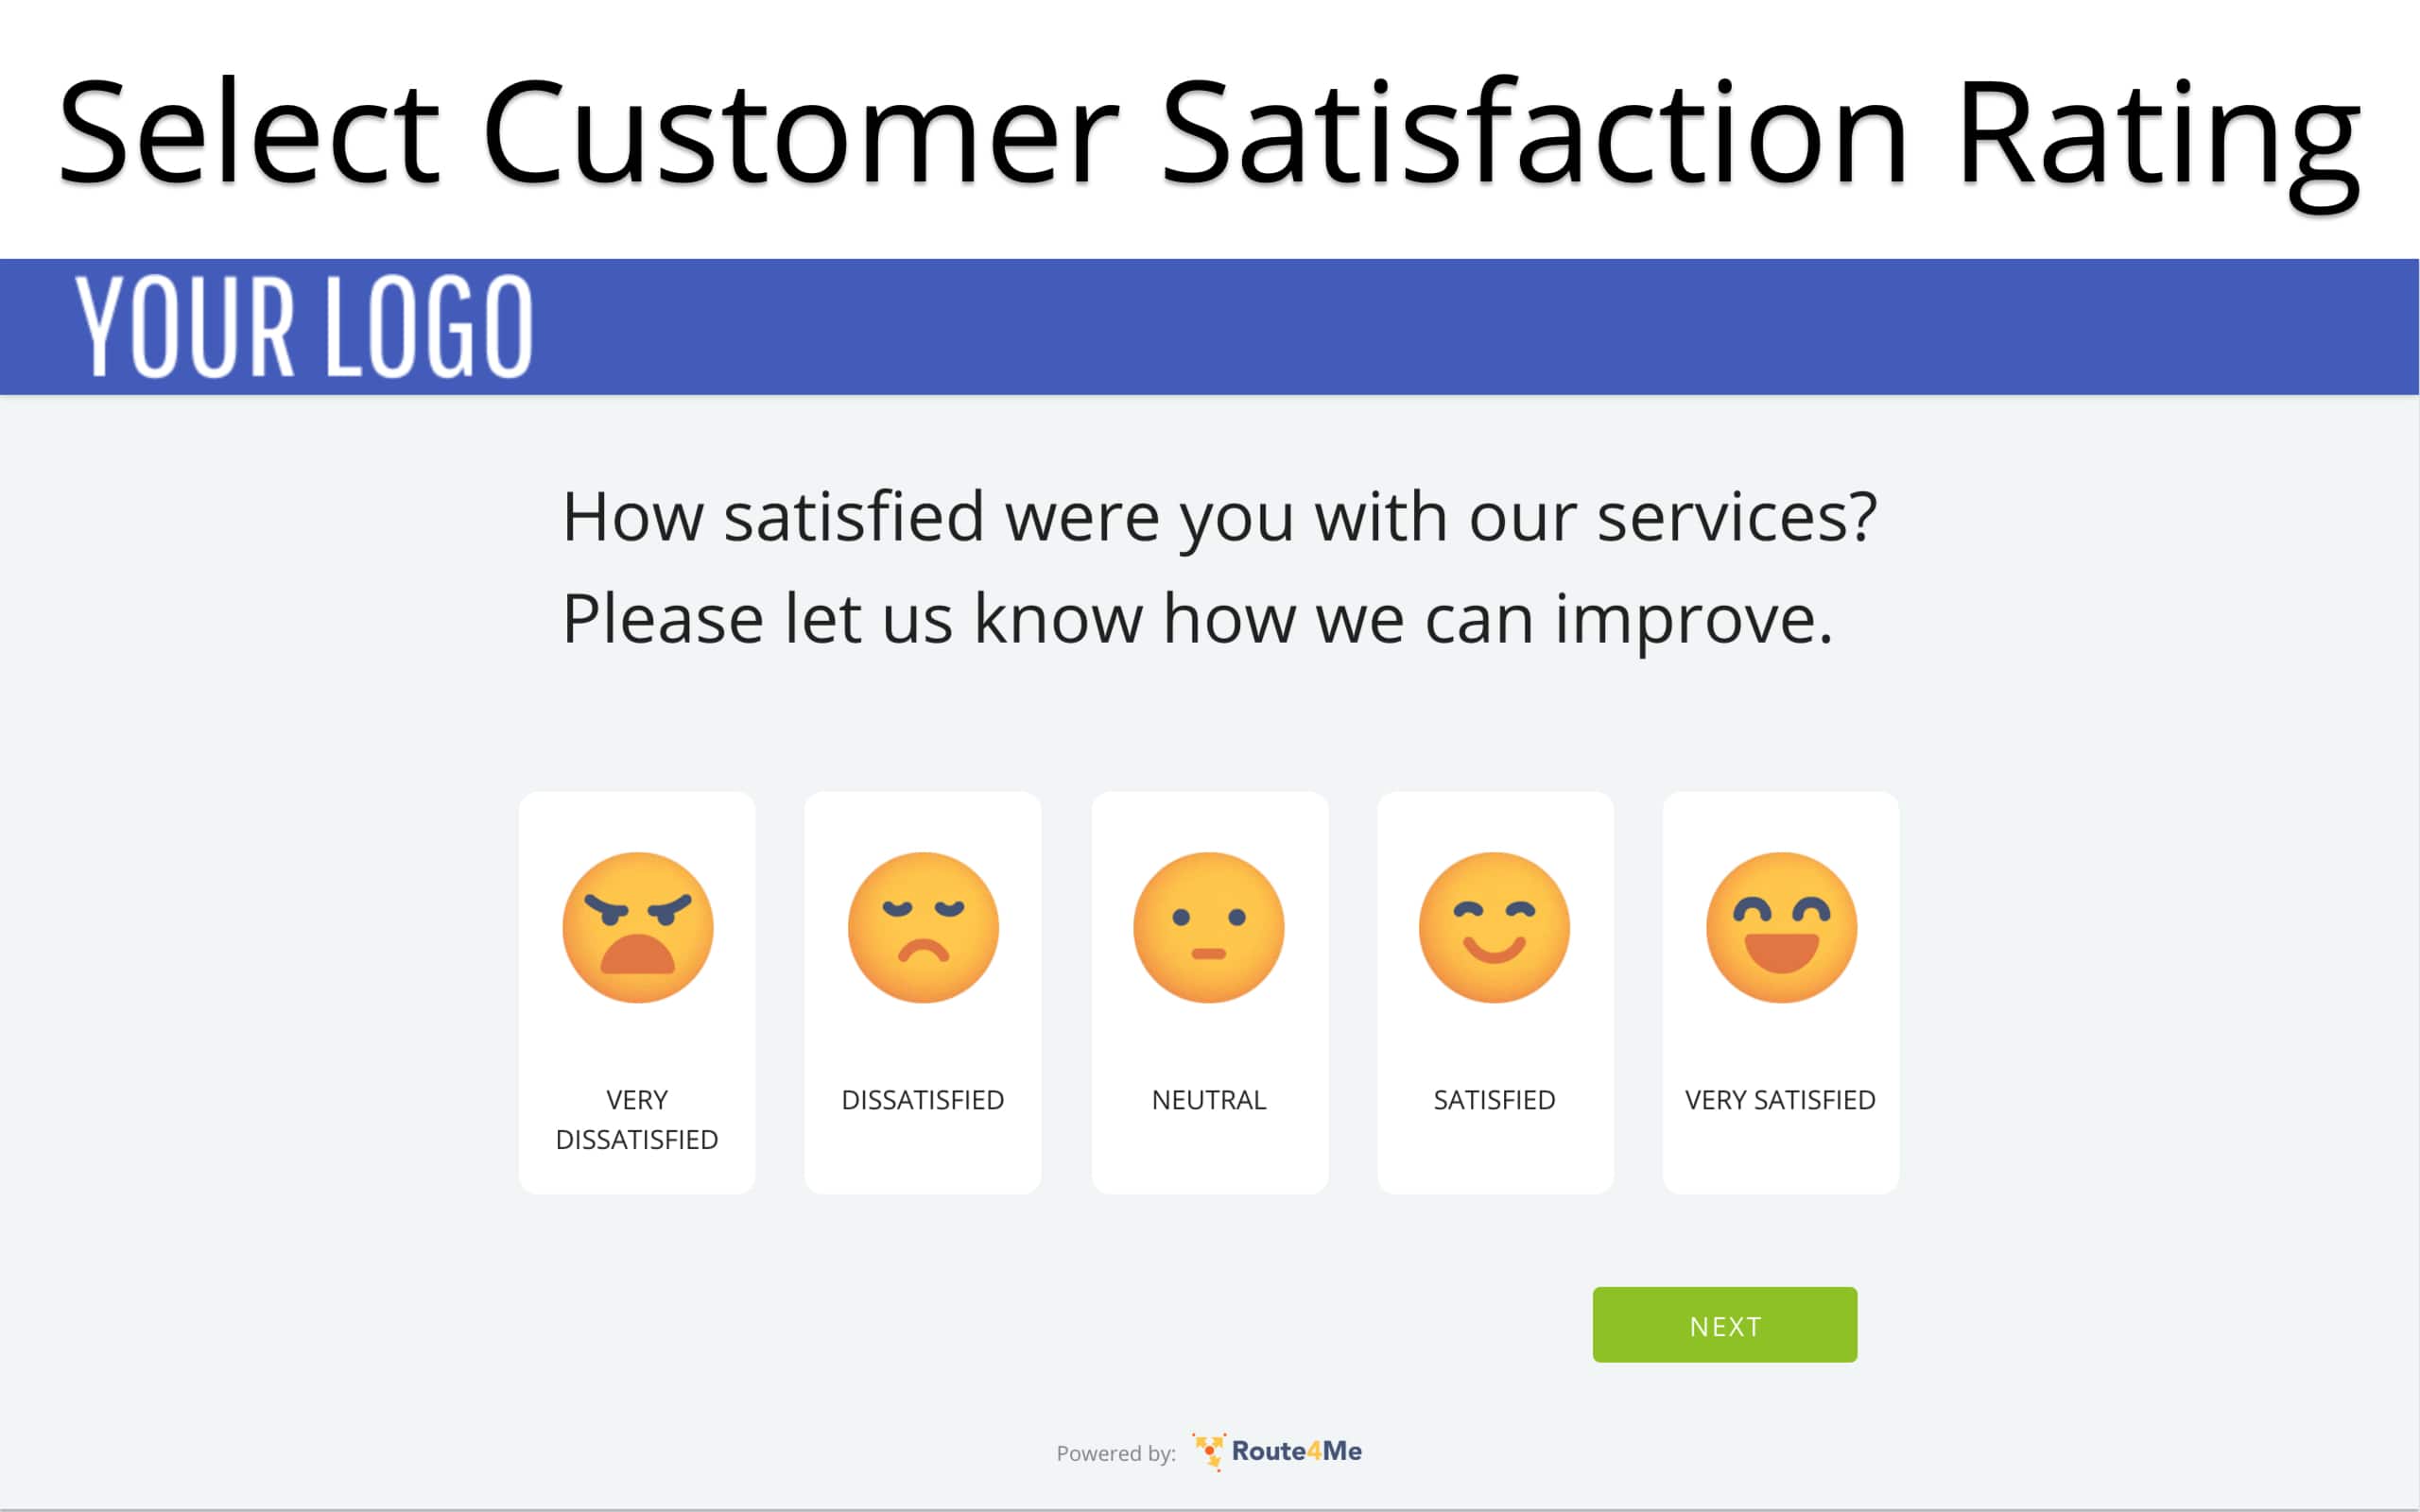 Select the customer satisfaction score or driver rating score for the provided services.